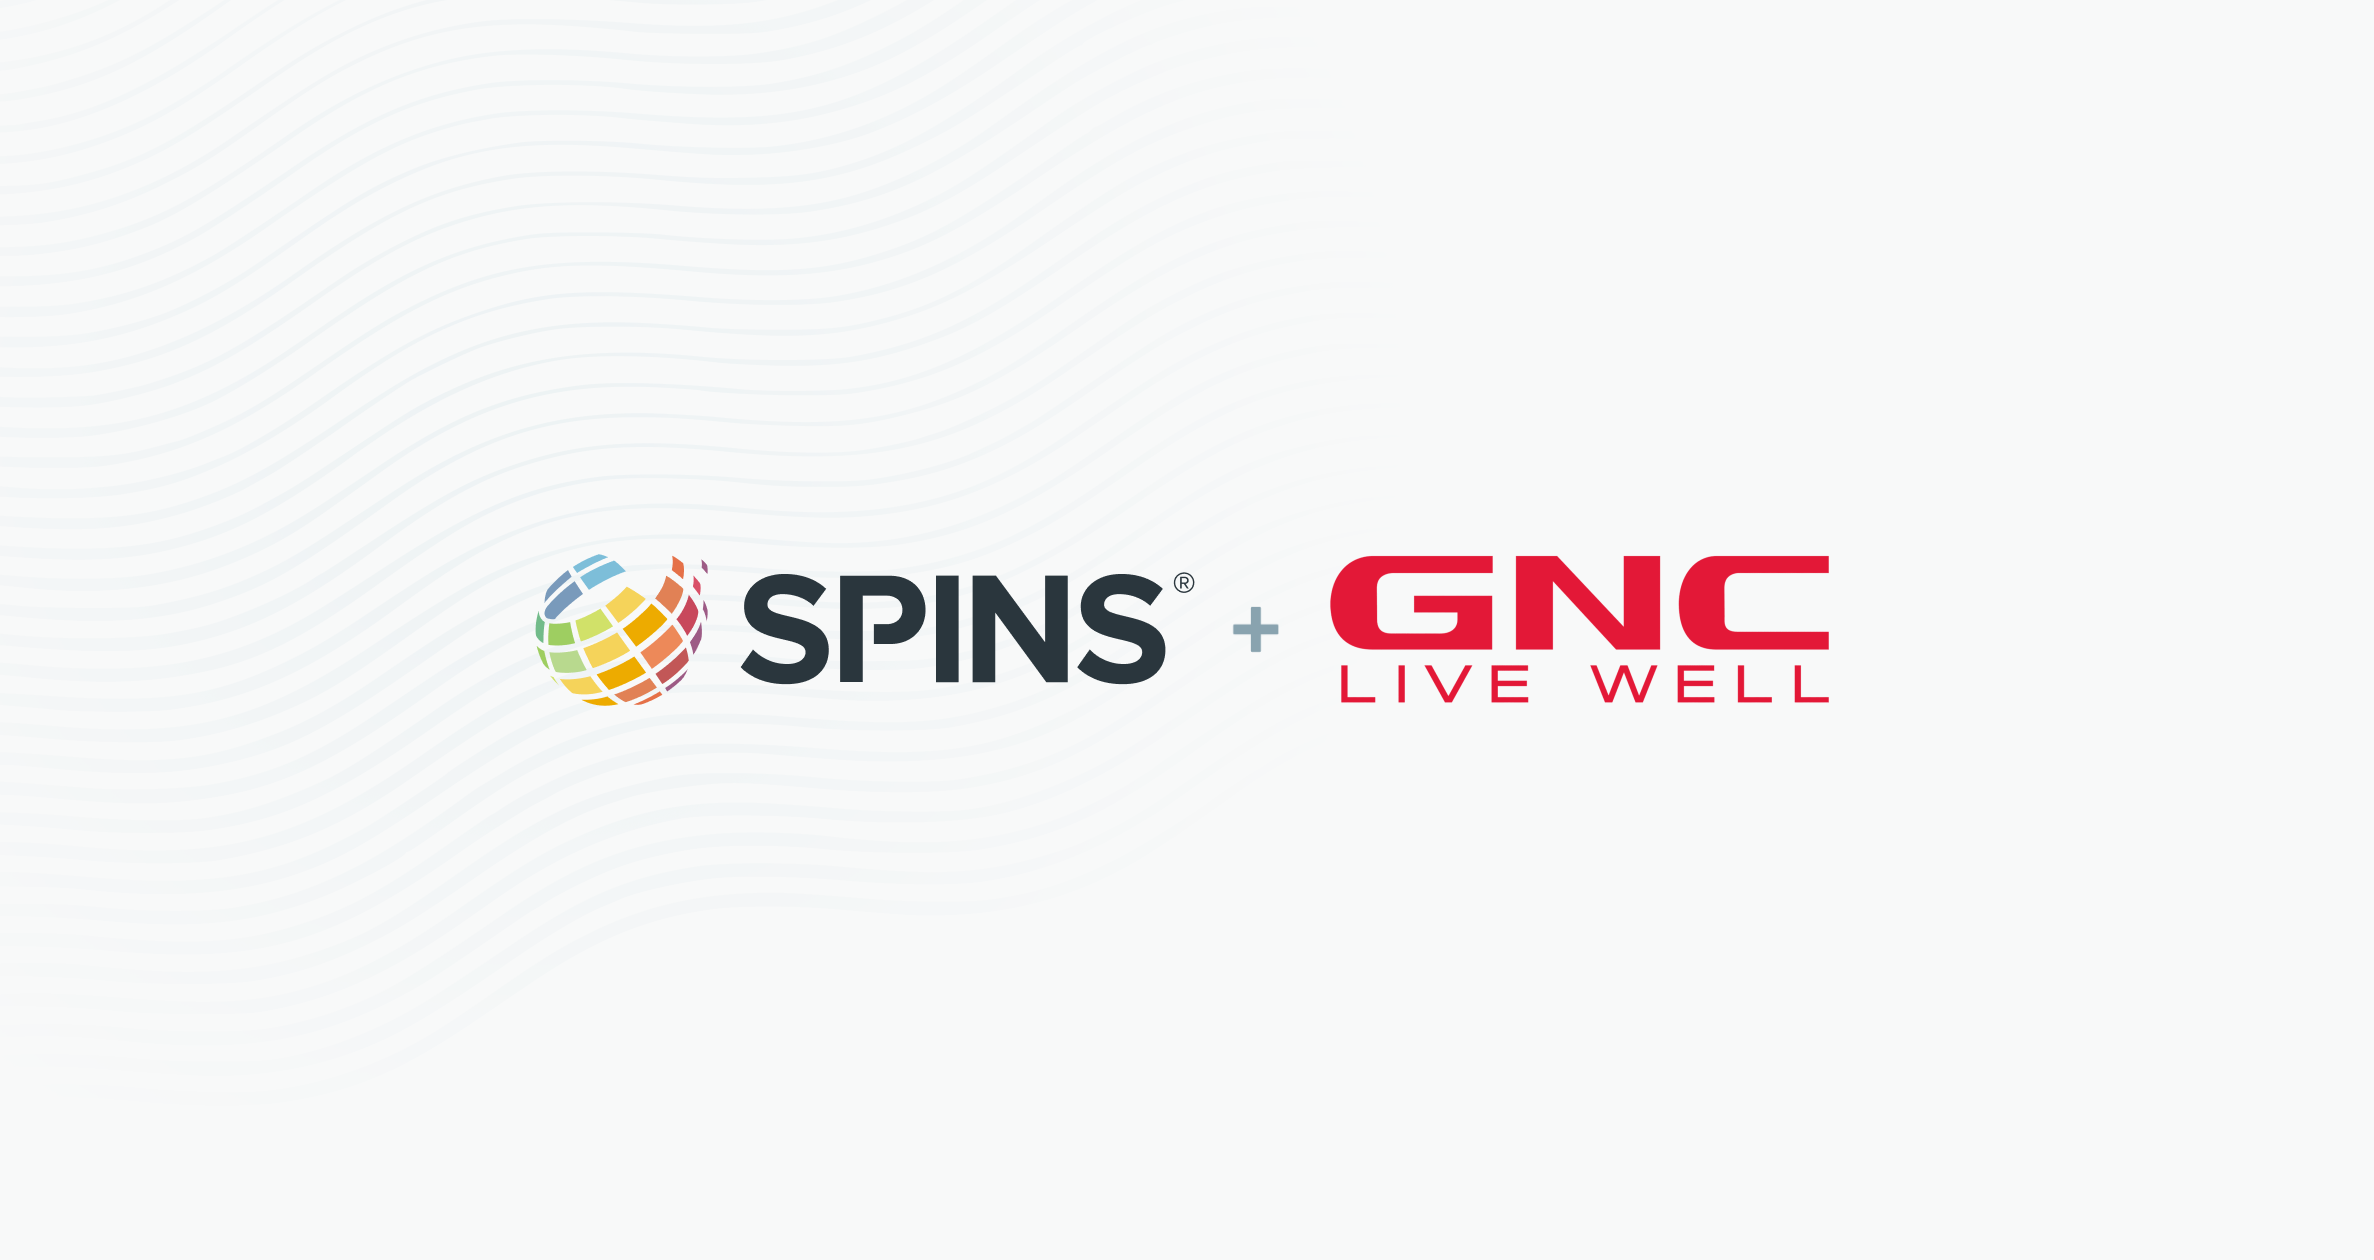 SPINS and GNC logos